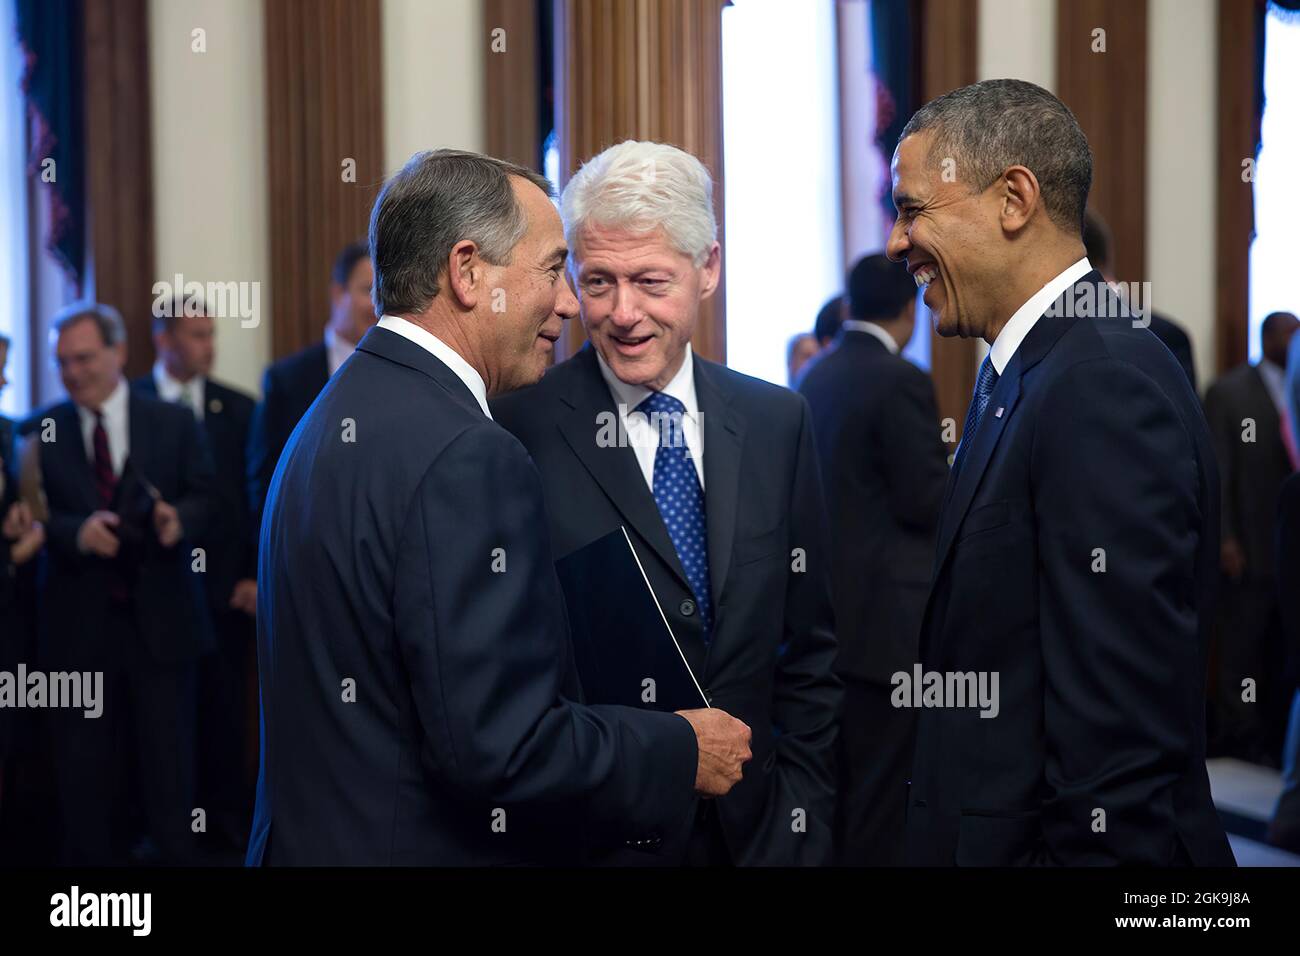 President Barack Obama and former President Bill Clinton speak with House Speaker John Boehner, R-Ohio, before a memorial service for former House Speaker Tom Foley, D-Wash. at the U.S. Capitol in Washington, D.C., Oct. 29, 2013. (Official White House Photo by Pete Souza)  This official White House photograph is being made available only for publication by news organizations and/or for personal use printing by the subject(s) of the photograph. The photograph may not be manipulated in any way and may not be used in commercial or political materials, advertisements, emails, products, promotions Stock Photo